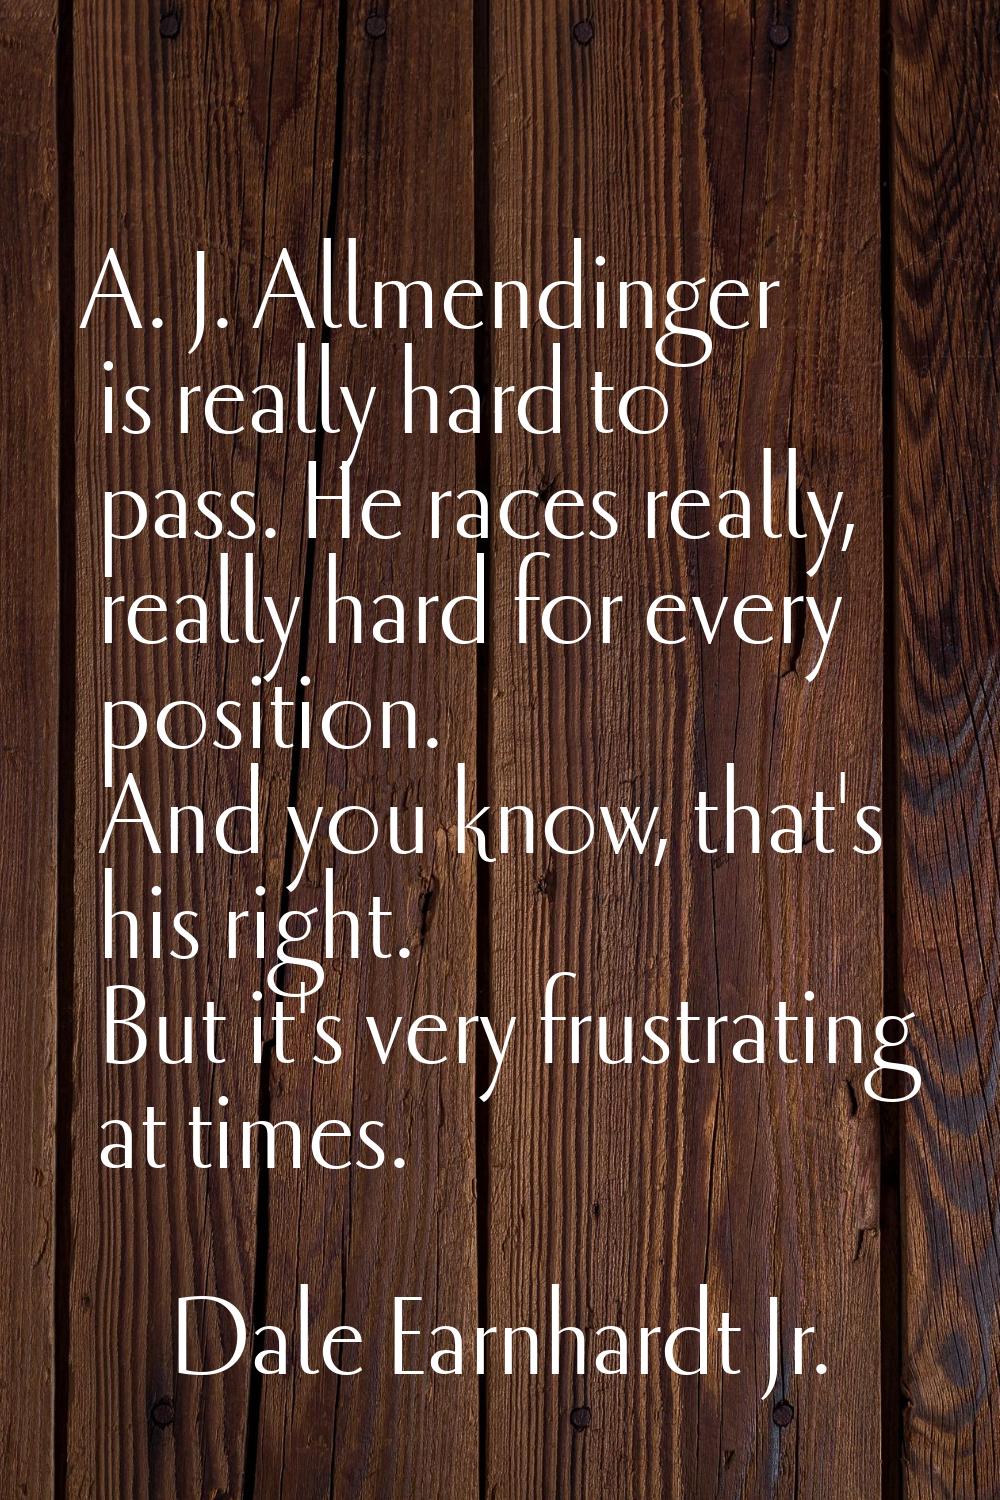 A. J. Allmendinger is really hard to pass. He races really, really hard for every position. And you